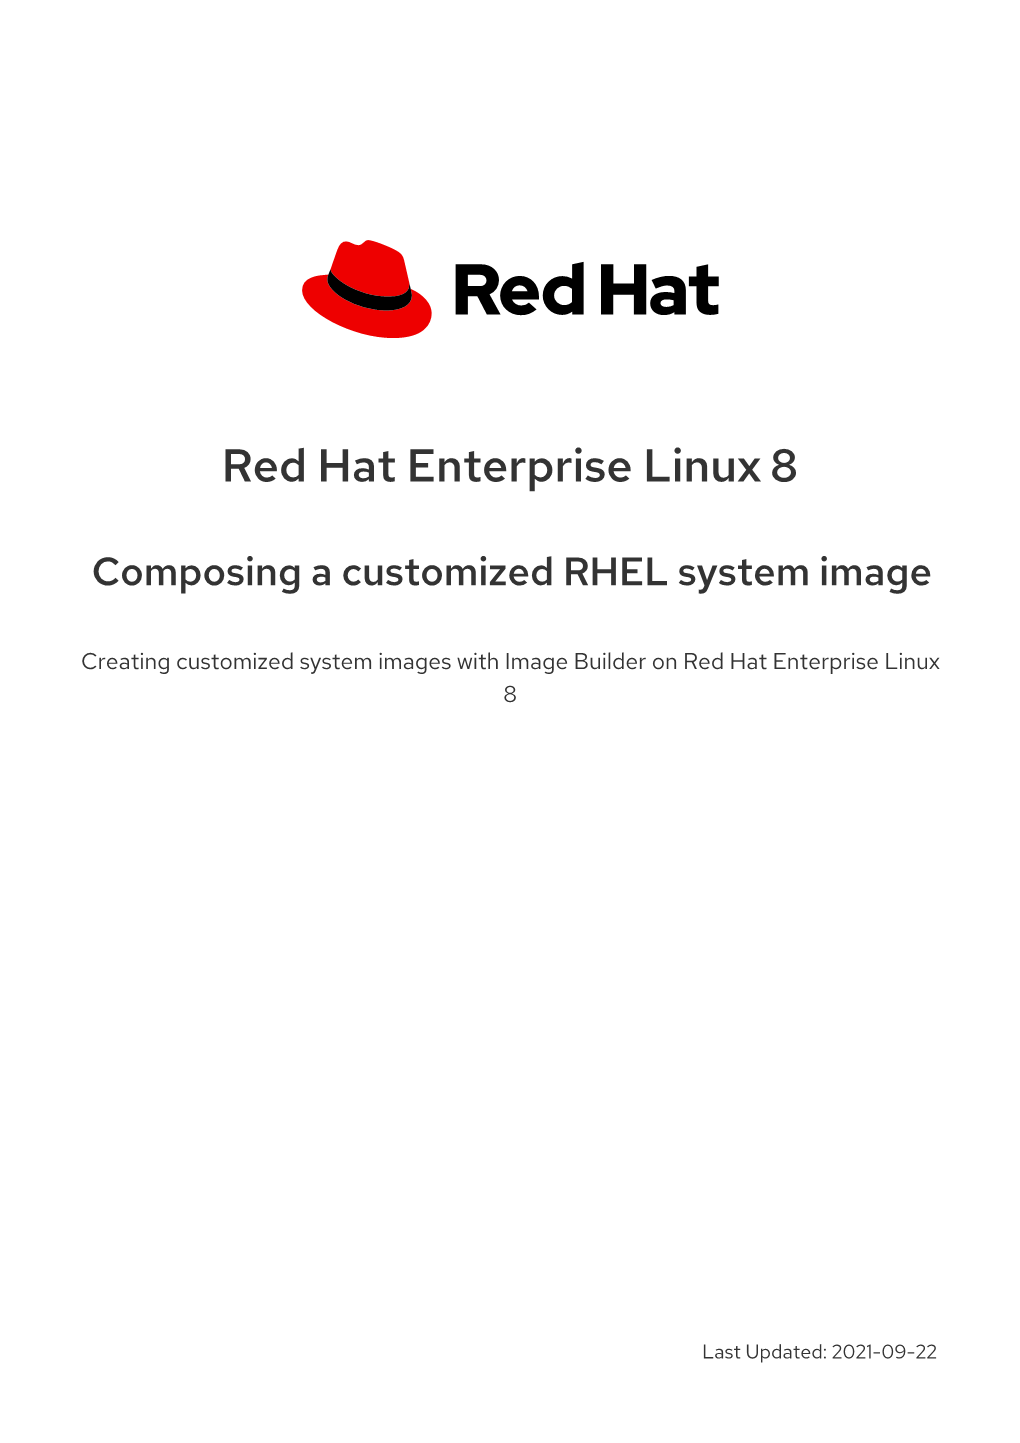 Red Hat Enterprise Linux 8 Composing a Customized RHEL System Image